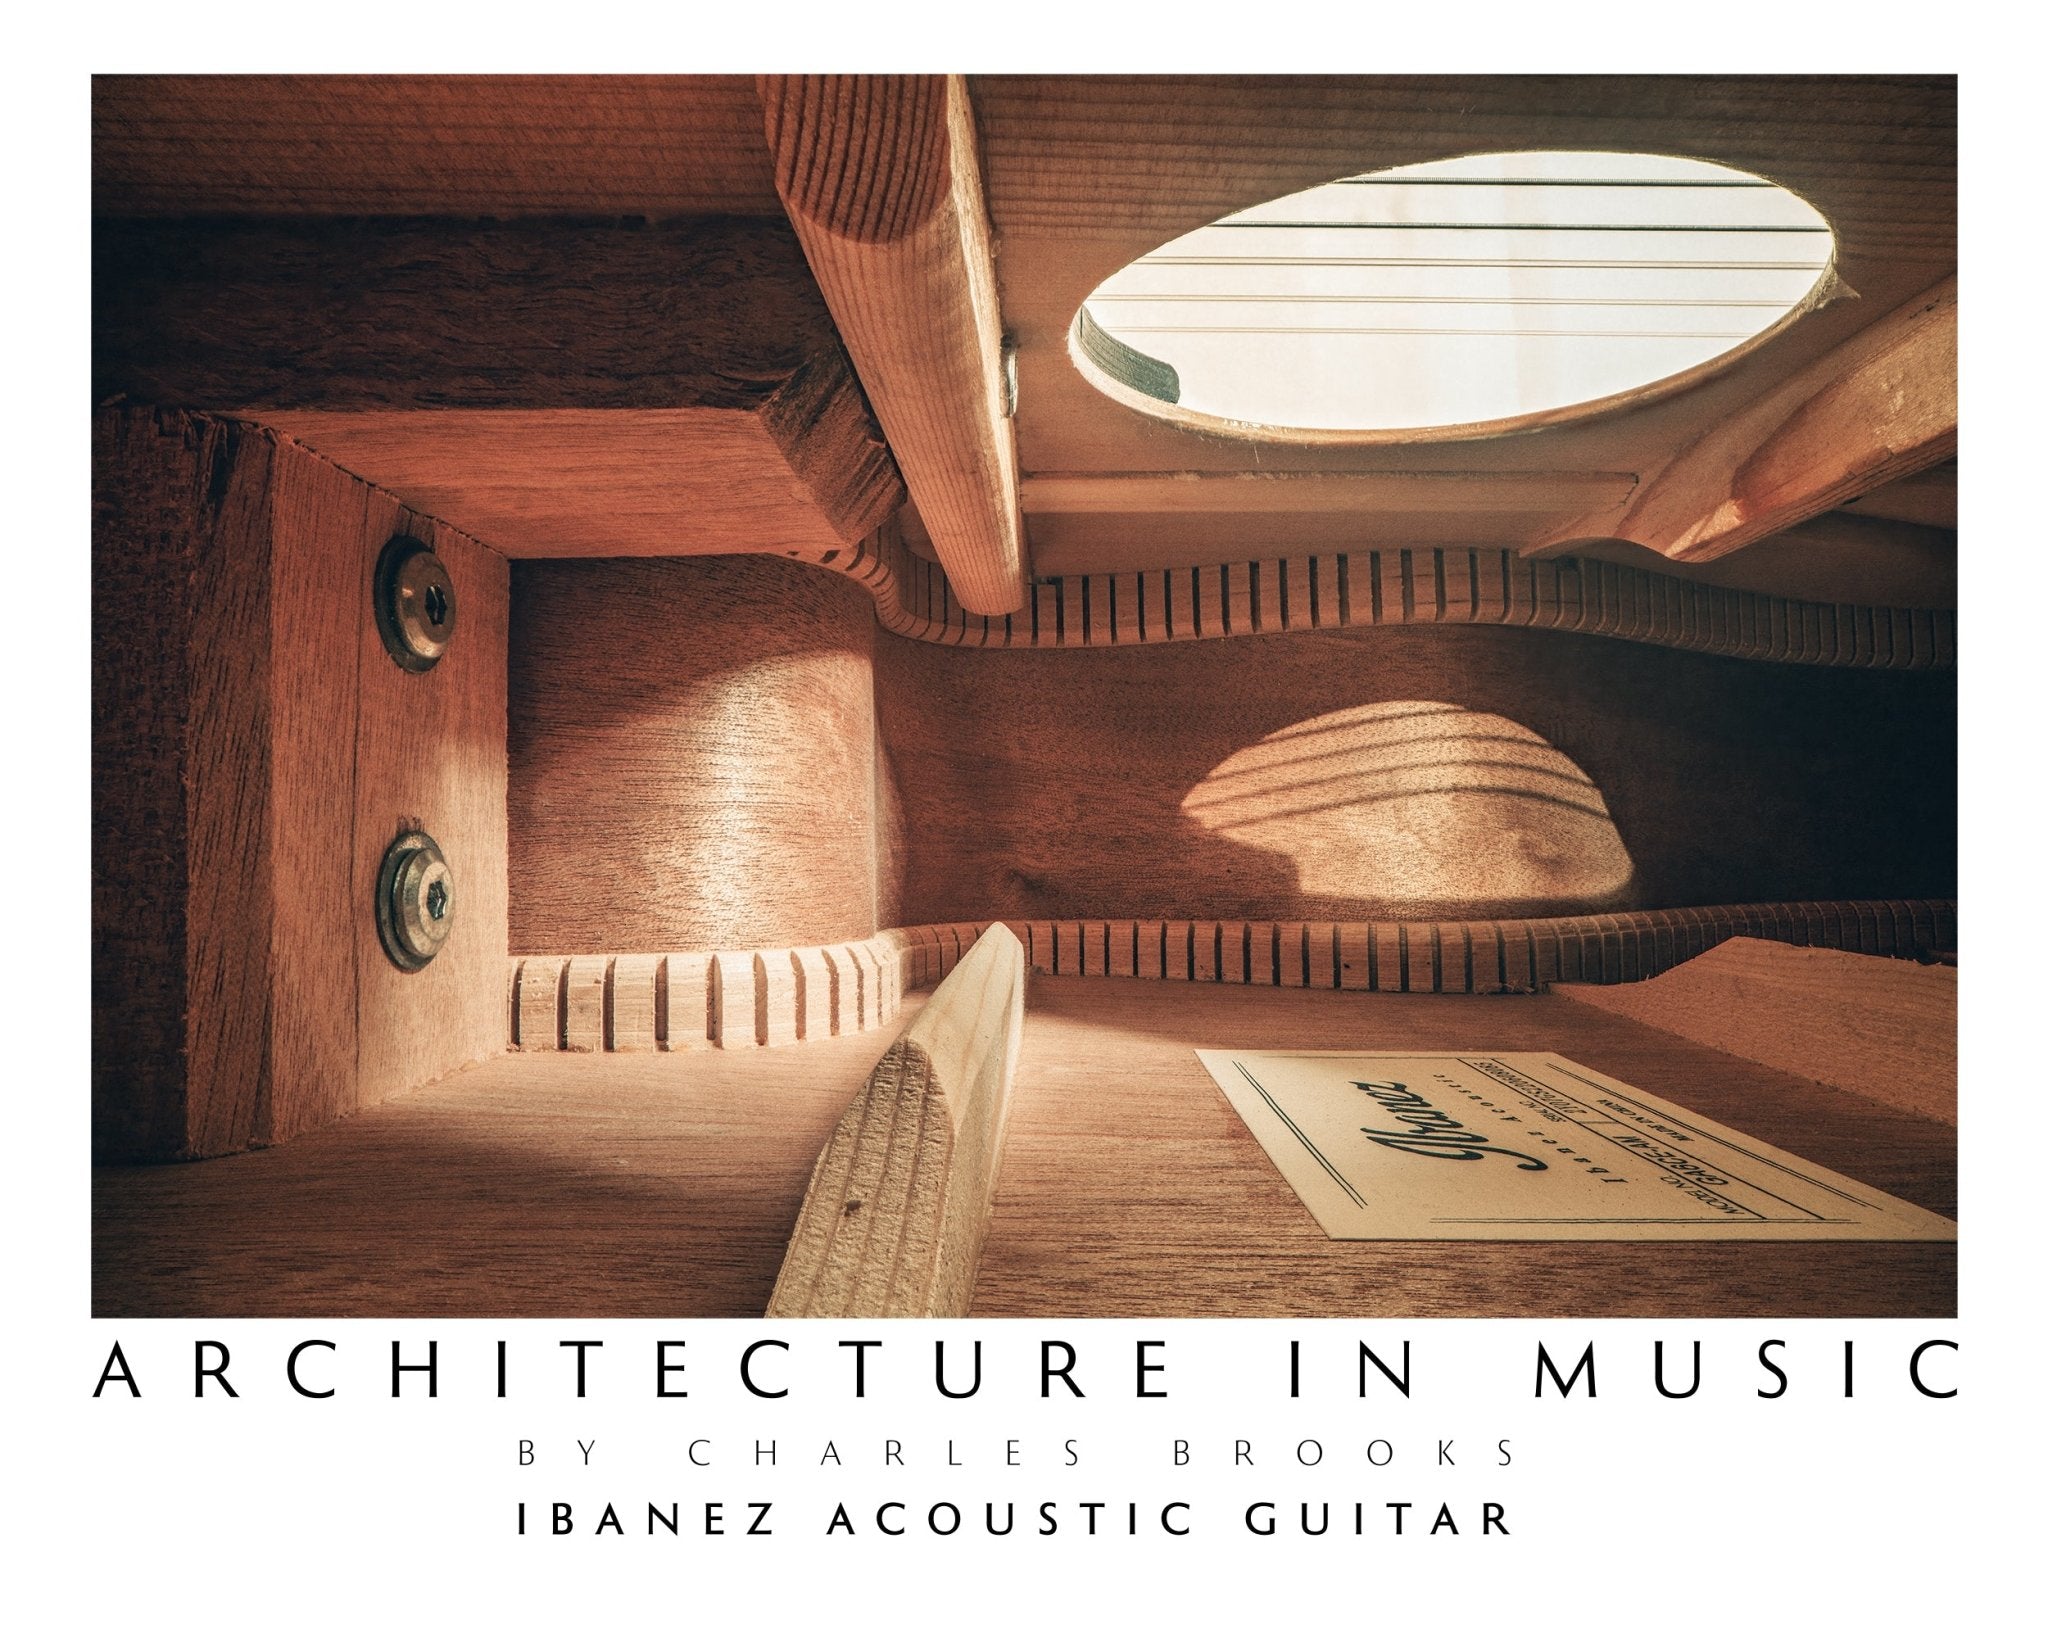 Photo of Ibanez Acoustic Guitar. High Quality Poster. - Giclée Poster Print - Architecture In Music